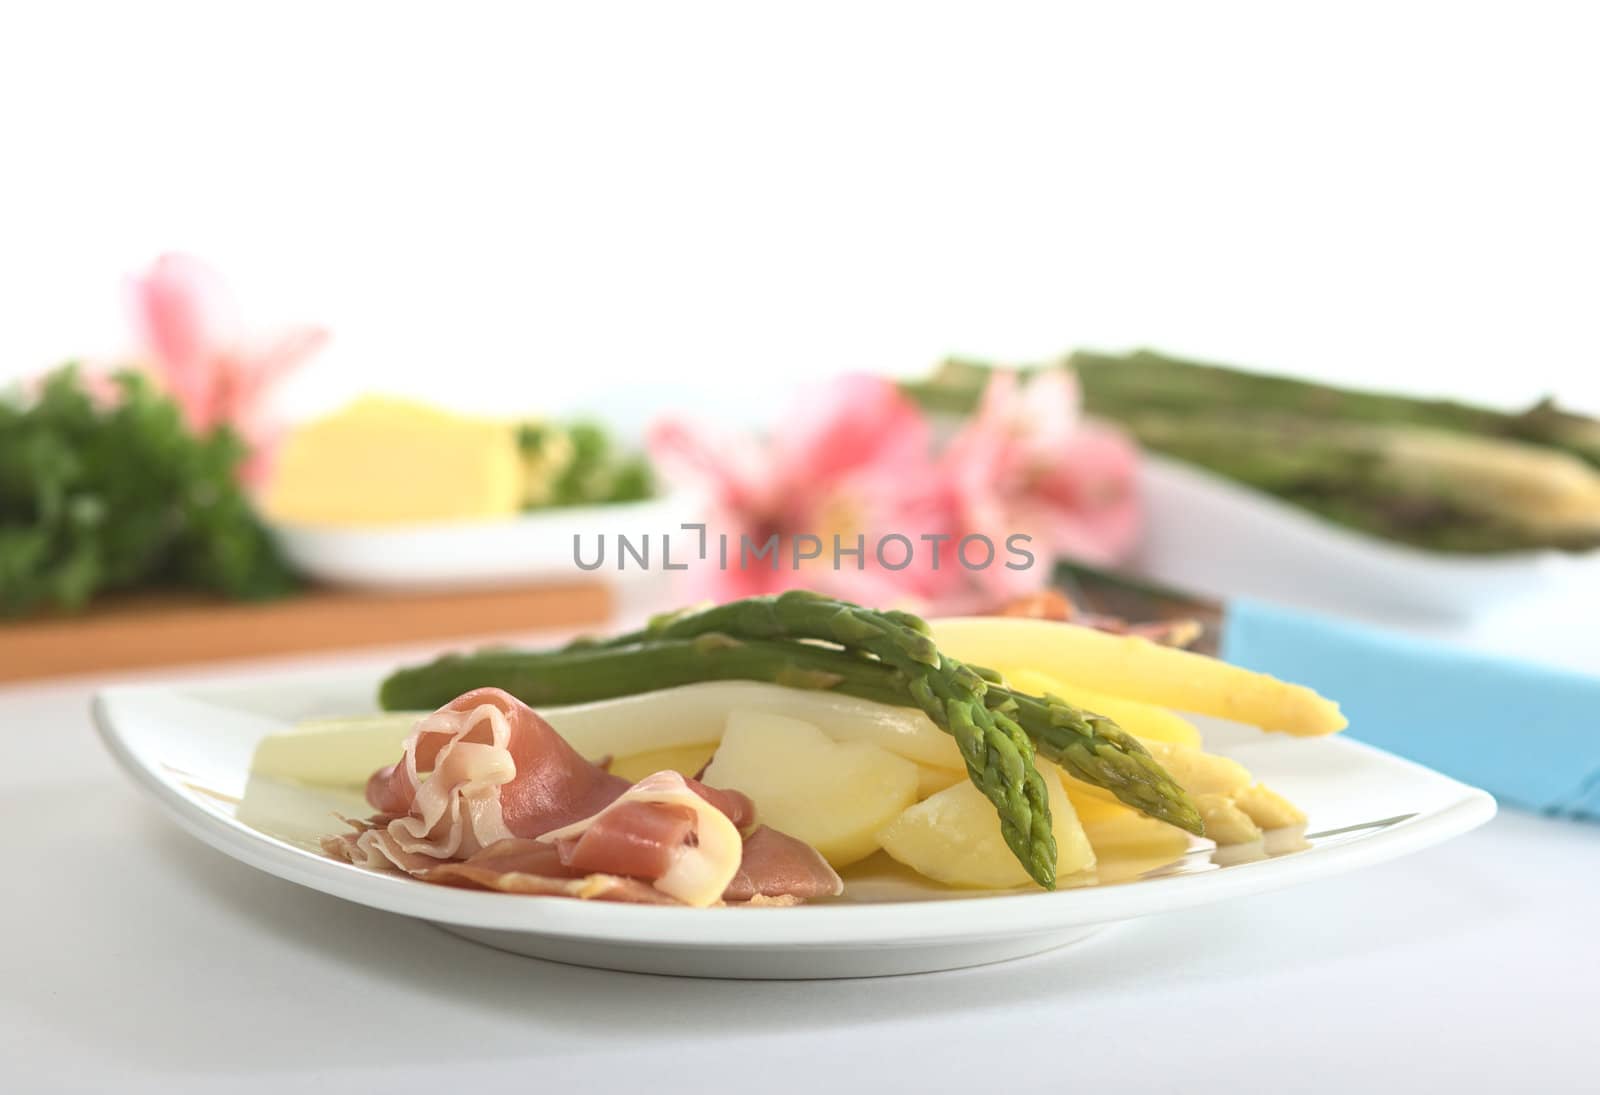 Asparagus with Ham and Potatoes by ildi